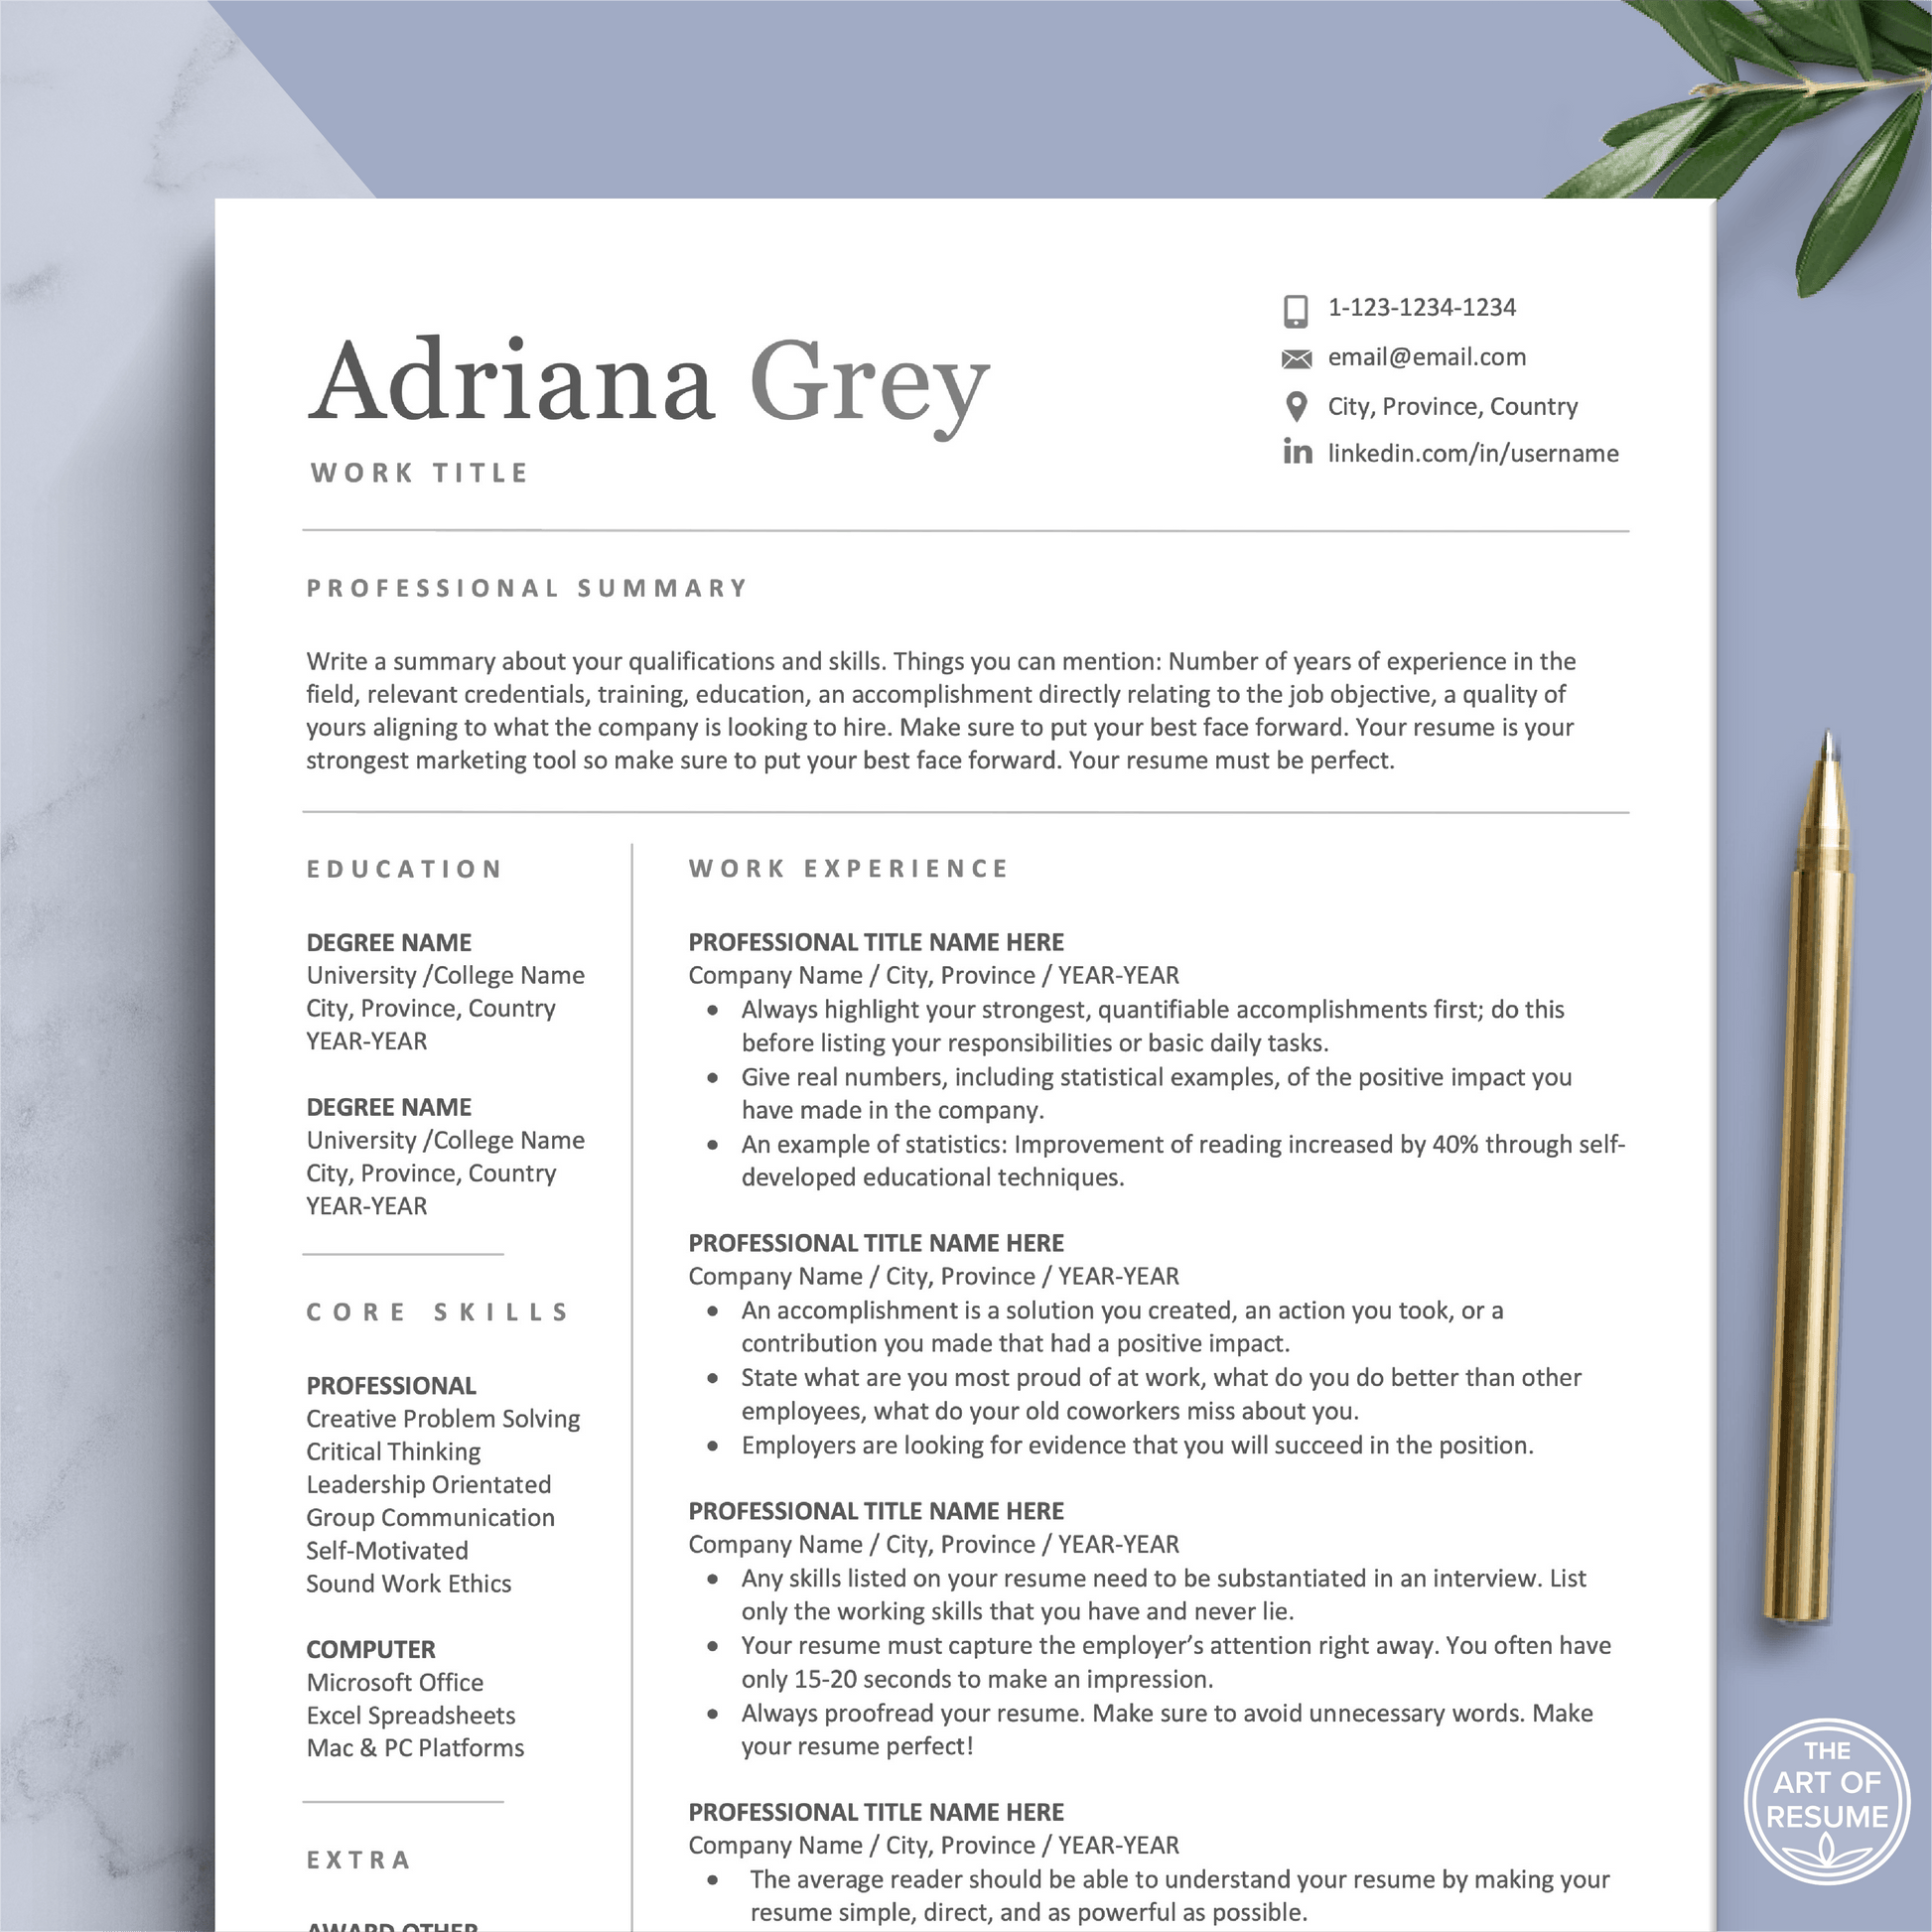 The Art of Resume Templates | Simple resume cv design template builder maker, instant download curriculum vitae for Apple Pages, Microsoft Word, Mac, PC